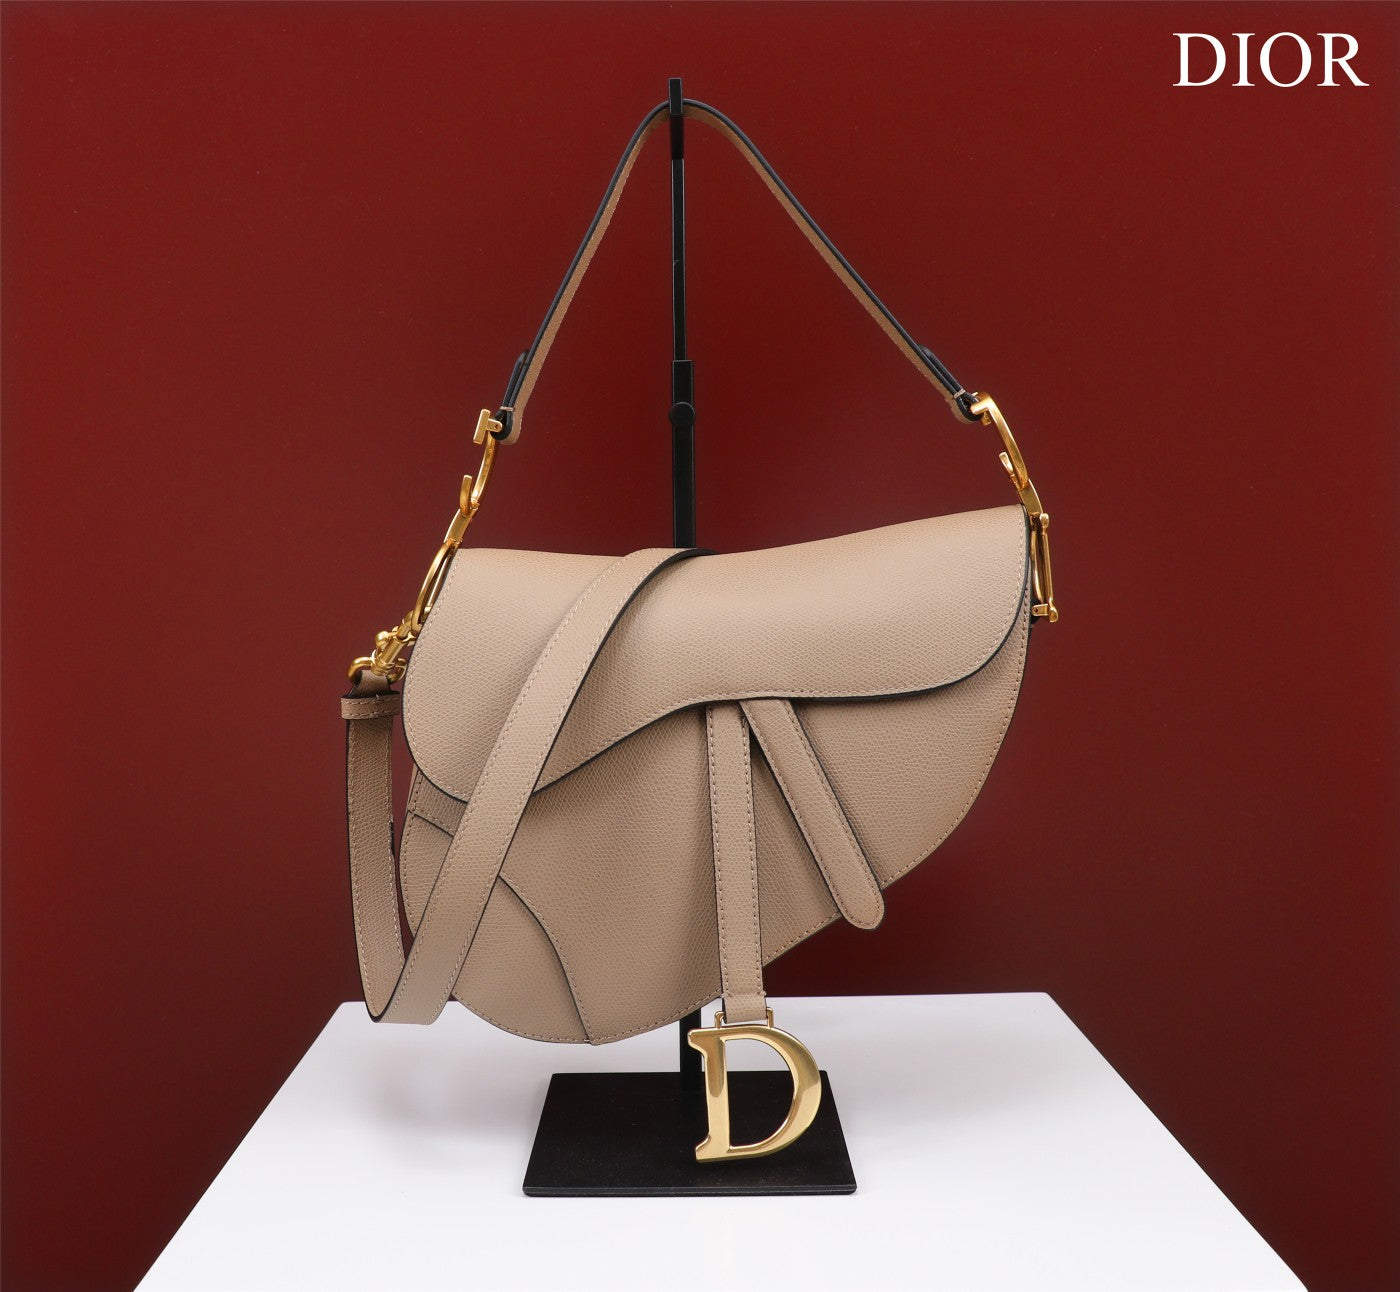 Dior Saddle bag in Grained calfskin leather